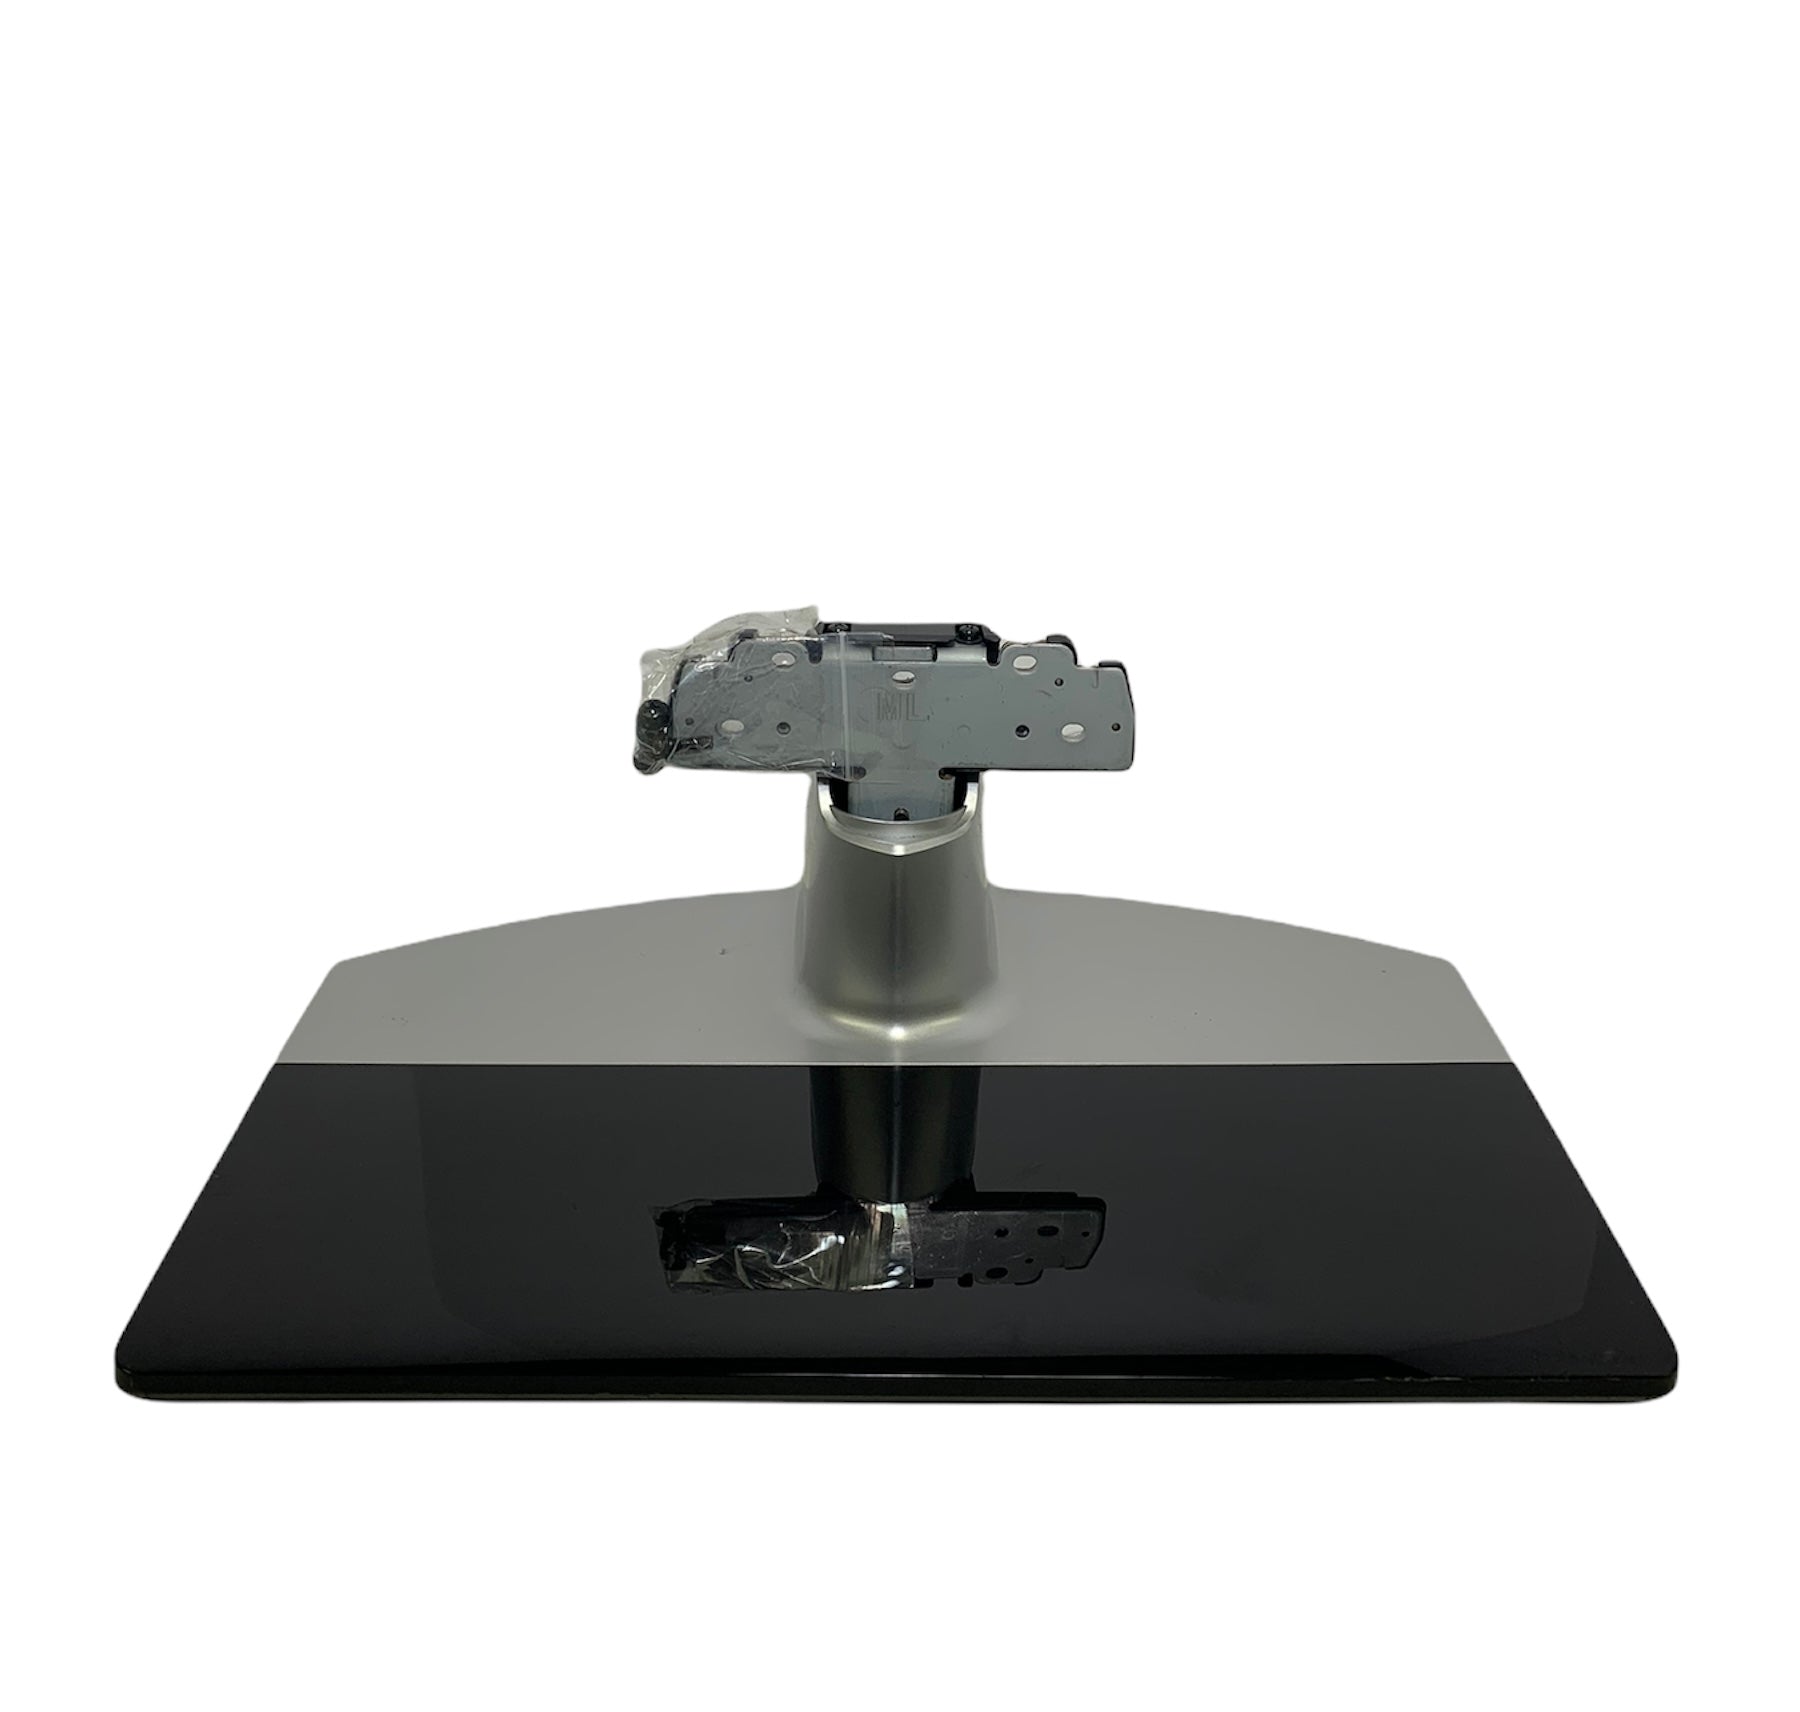 Sony KDL-37XBR6 TV Stand/Base